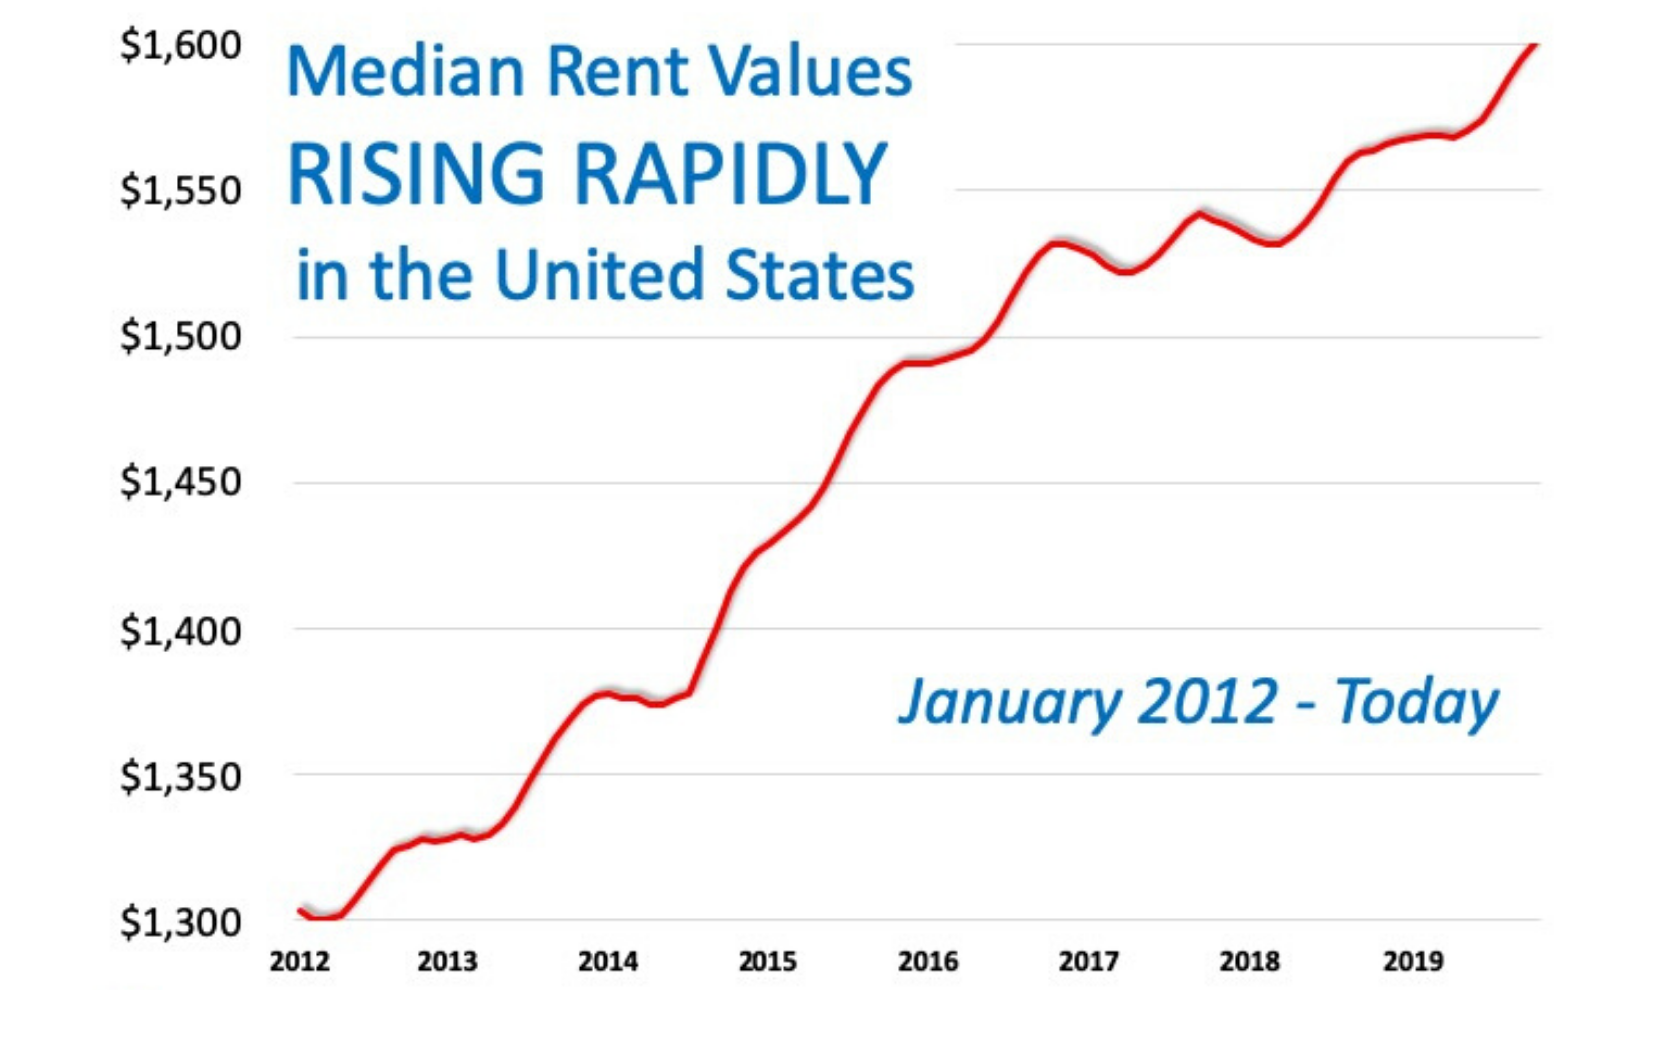 YearOverYear Rental Prices on the Rise